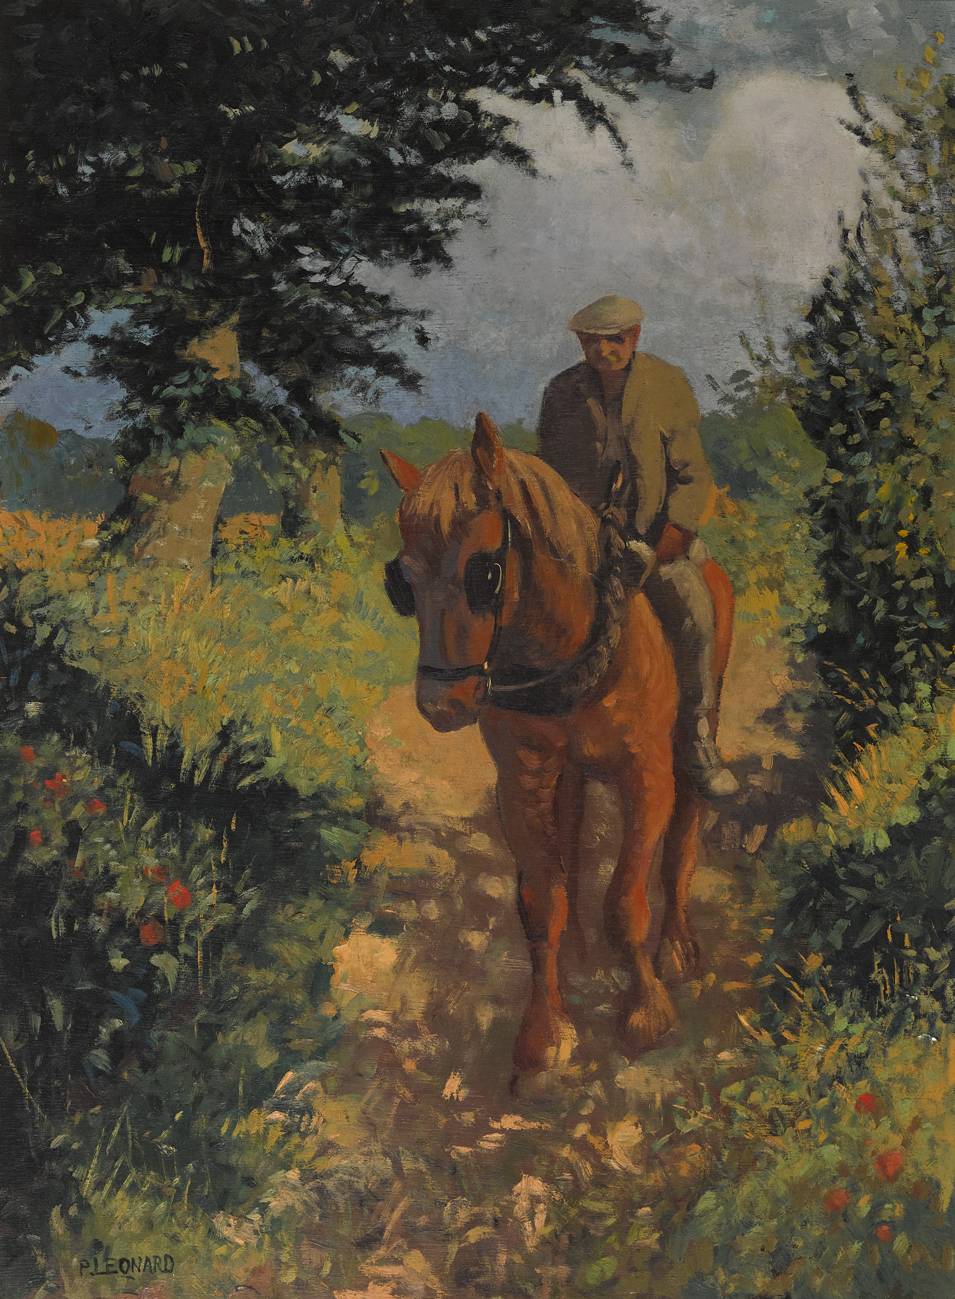 COUNTRY LANE - MIDDAY, RUSH, COUNTY DUBLIN, 1942 by Patrick Leonard sold for �4,900 at Whyte's Auctions